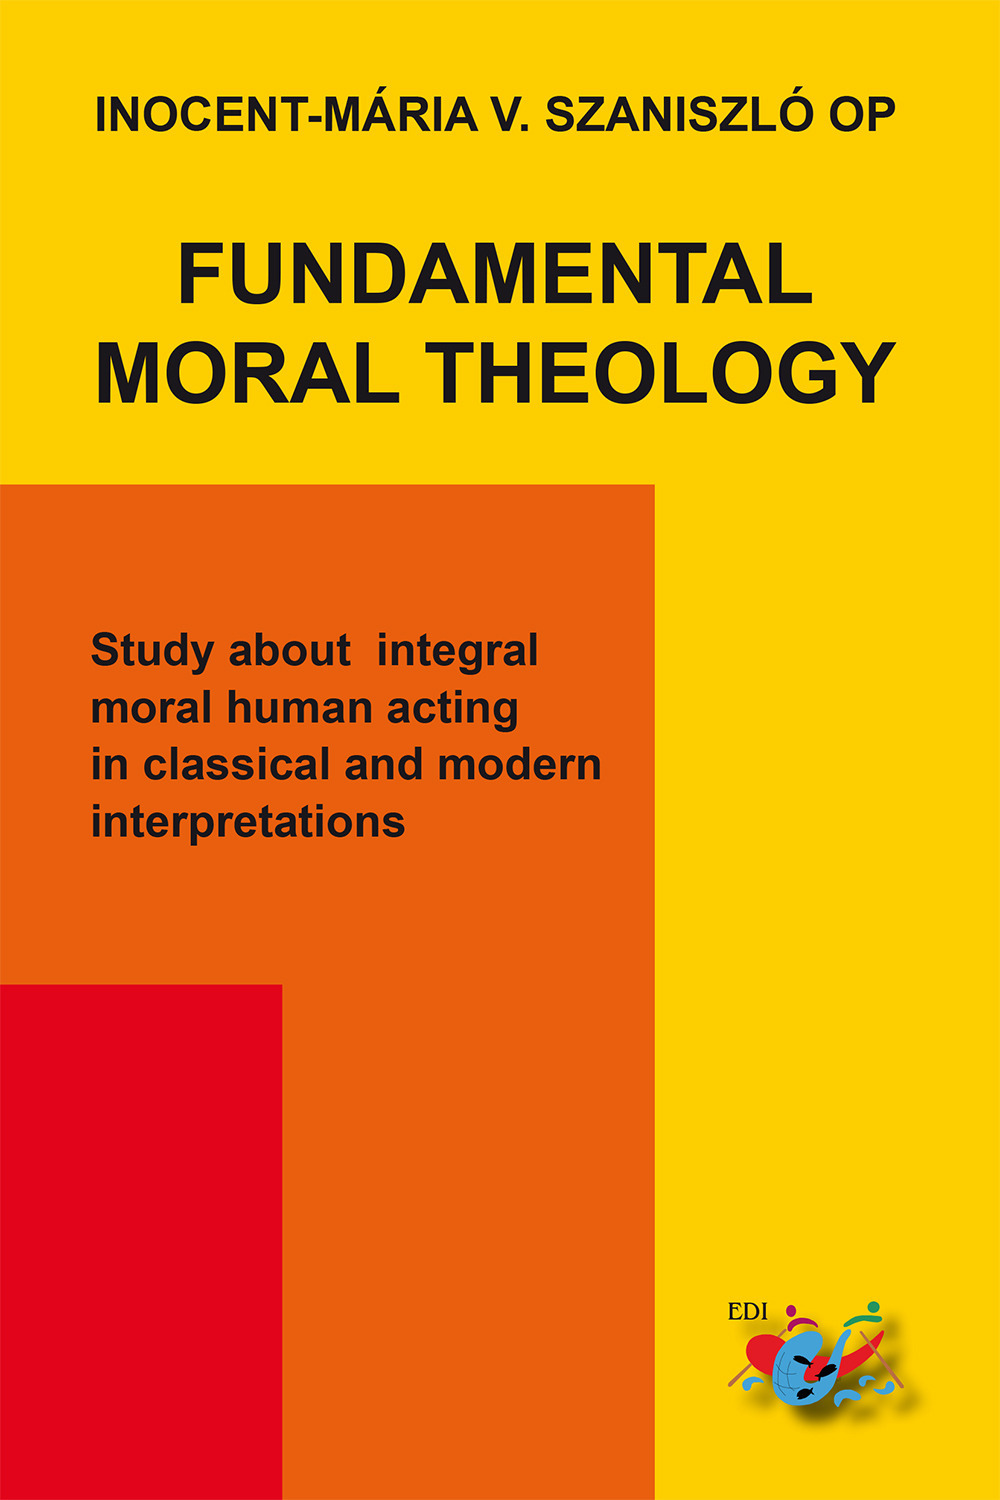 Fundamental moral theology. Study about integral moral human acting in classical and modern interpretations